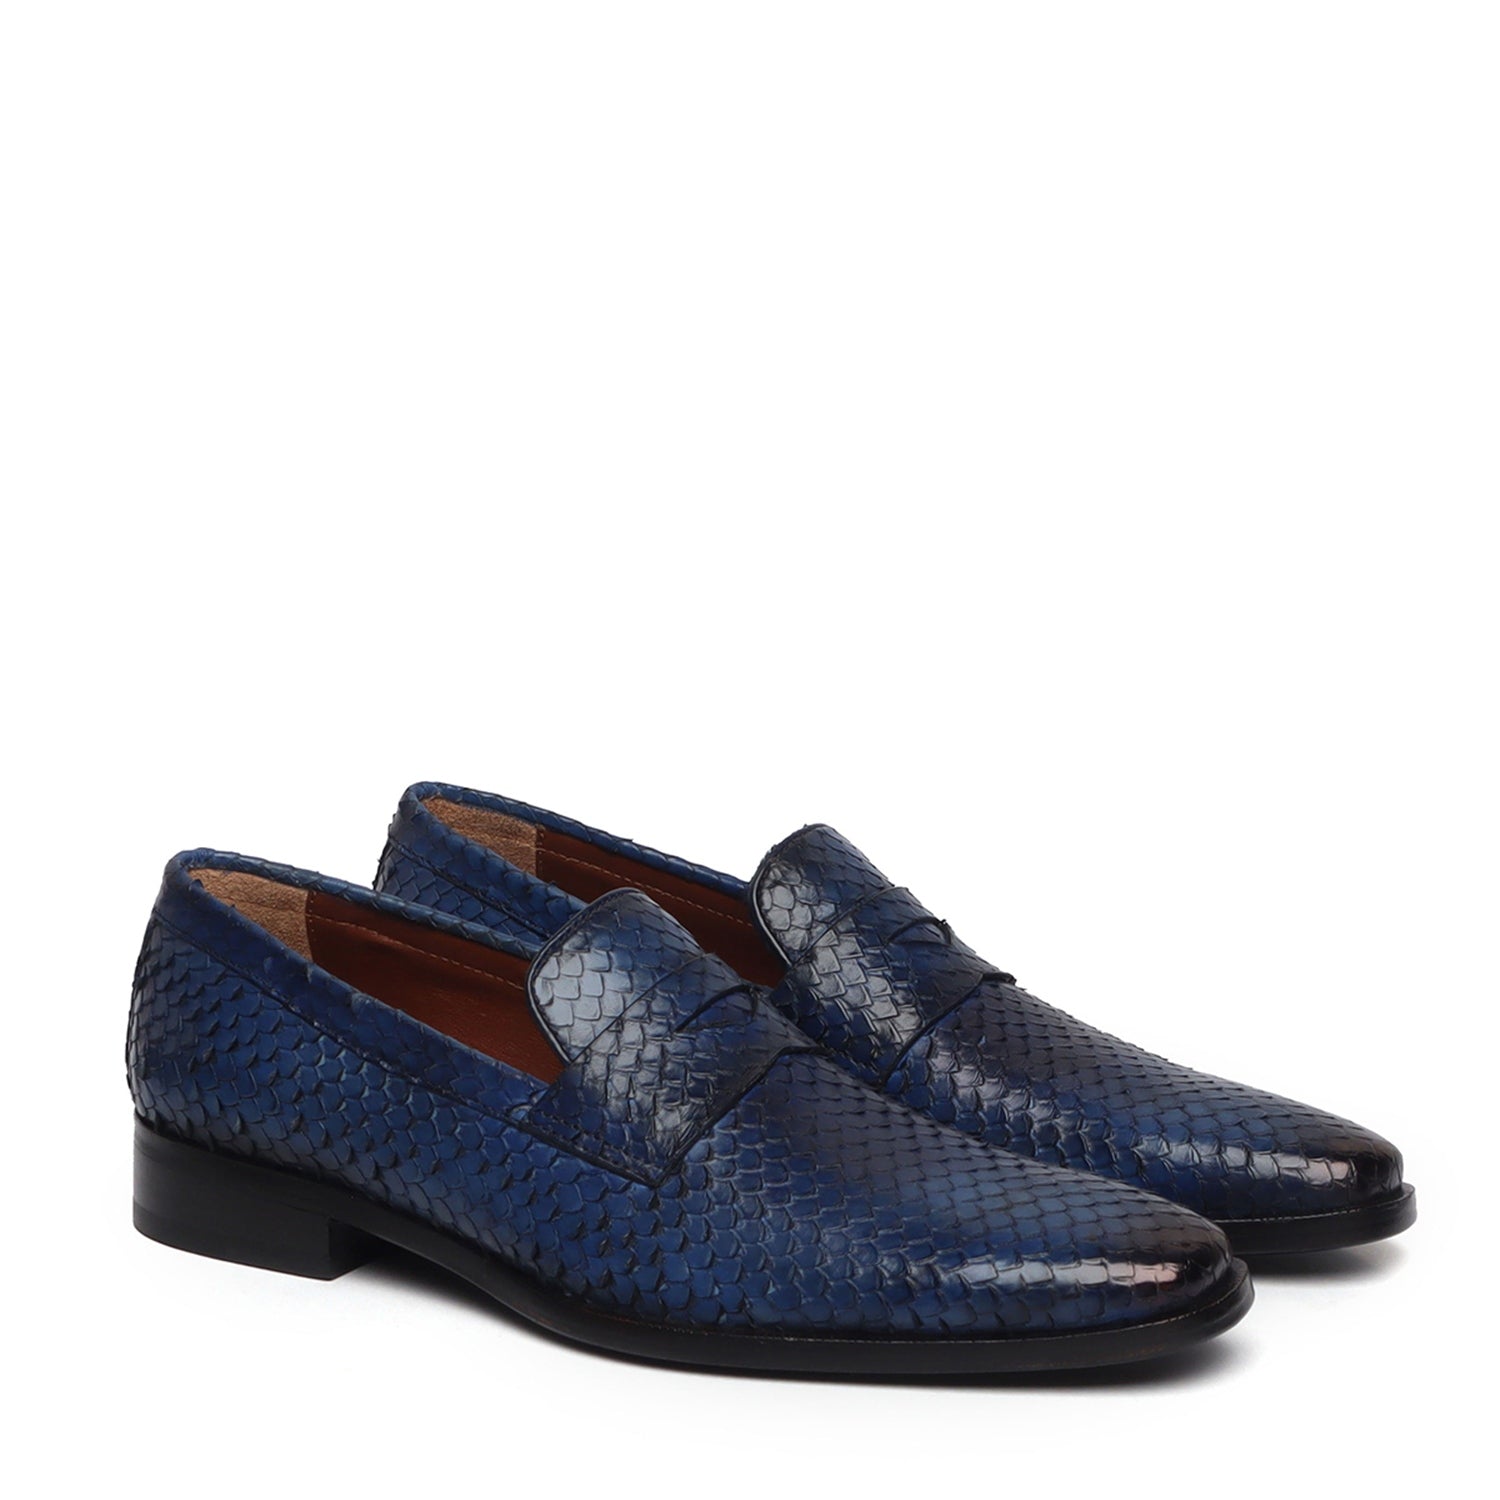 Snake Skin Textured Loafers in Blue Leather